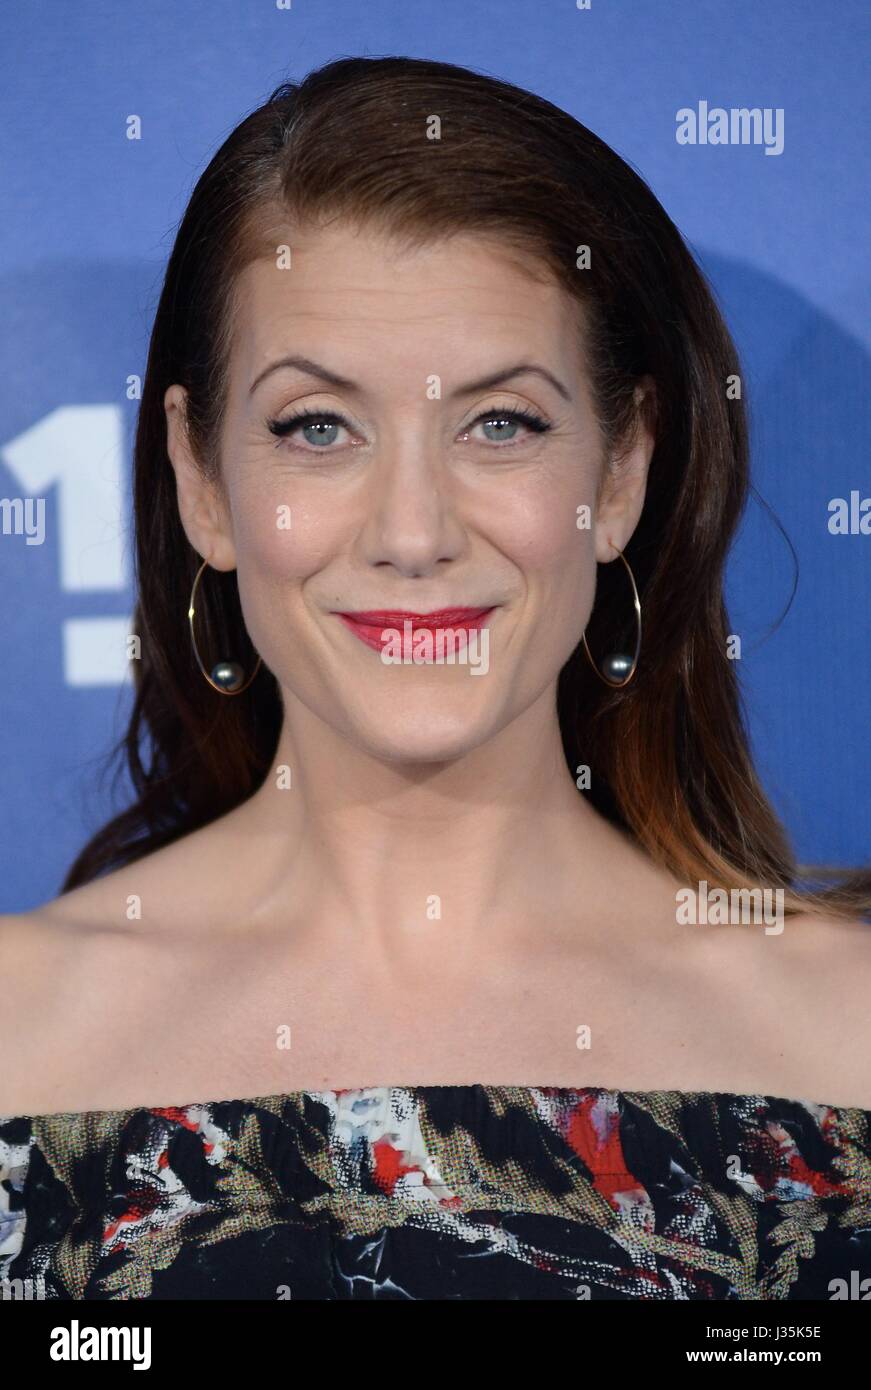 New York, NY, USA. 2nd May, 2017. Kate Walsh at arrivals for Planned Parenthood 100th Anniversary Gala, Pier 36/South Street, New York, NY May 2, 2017. Credit: Kristin Callahan/Everett Collection/Alamy Live News Stock Photo